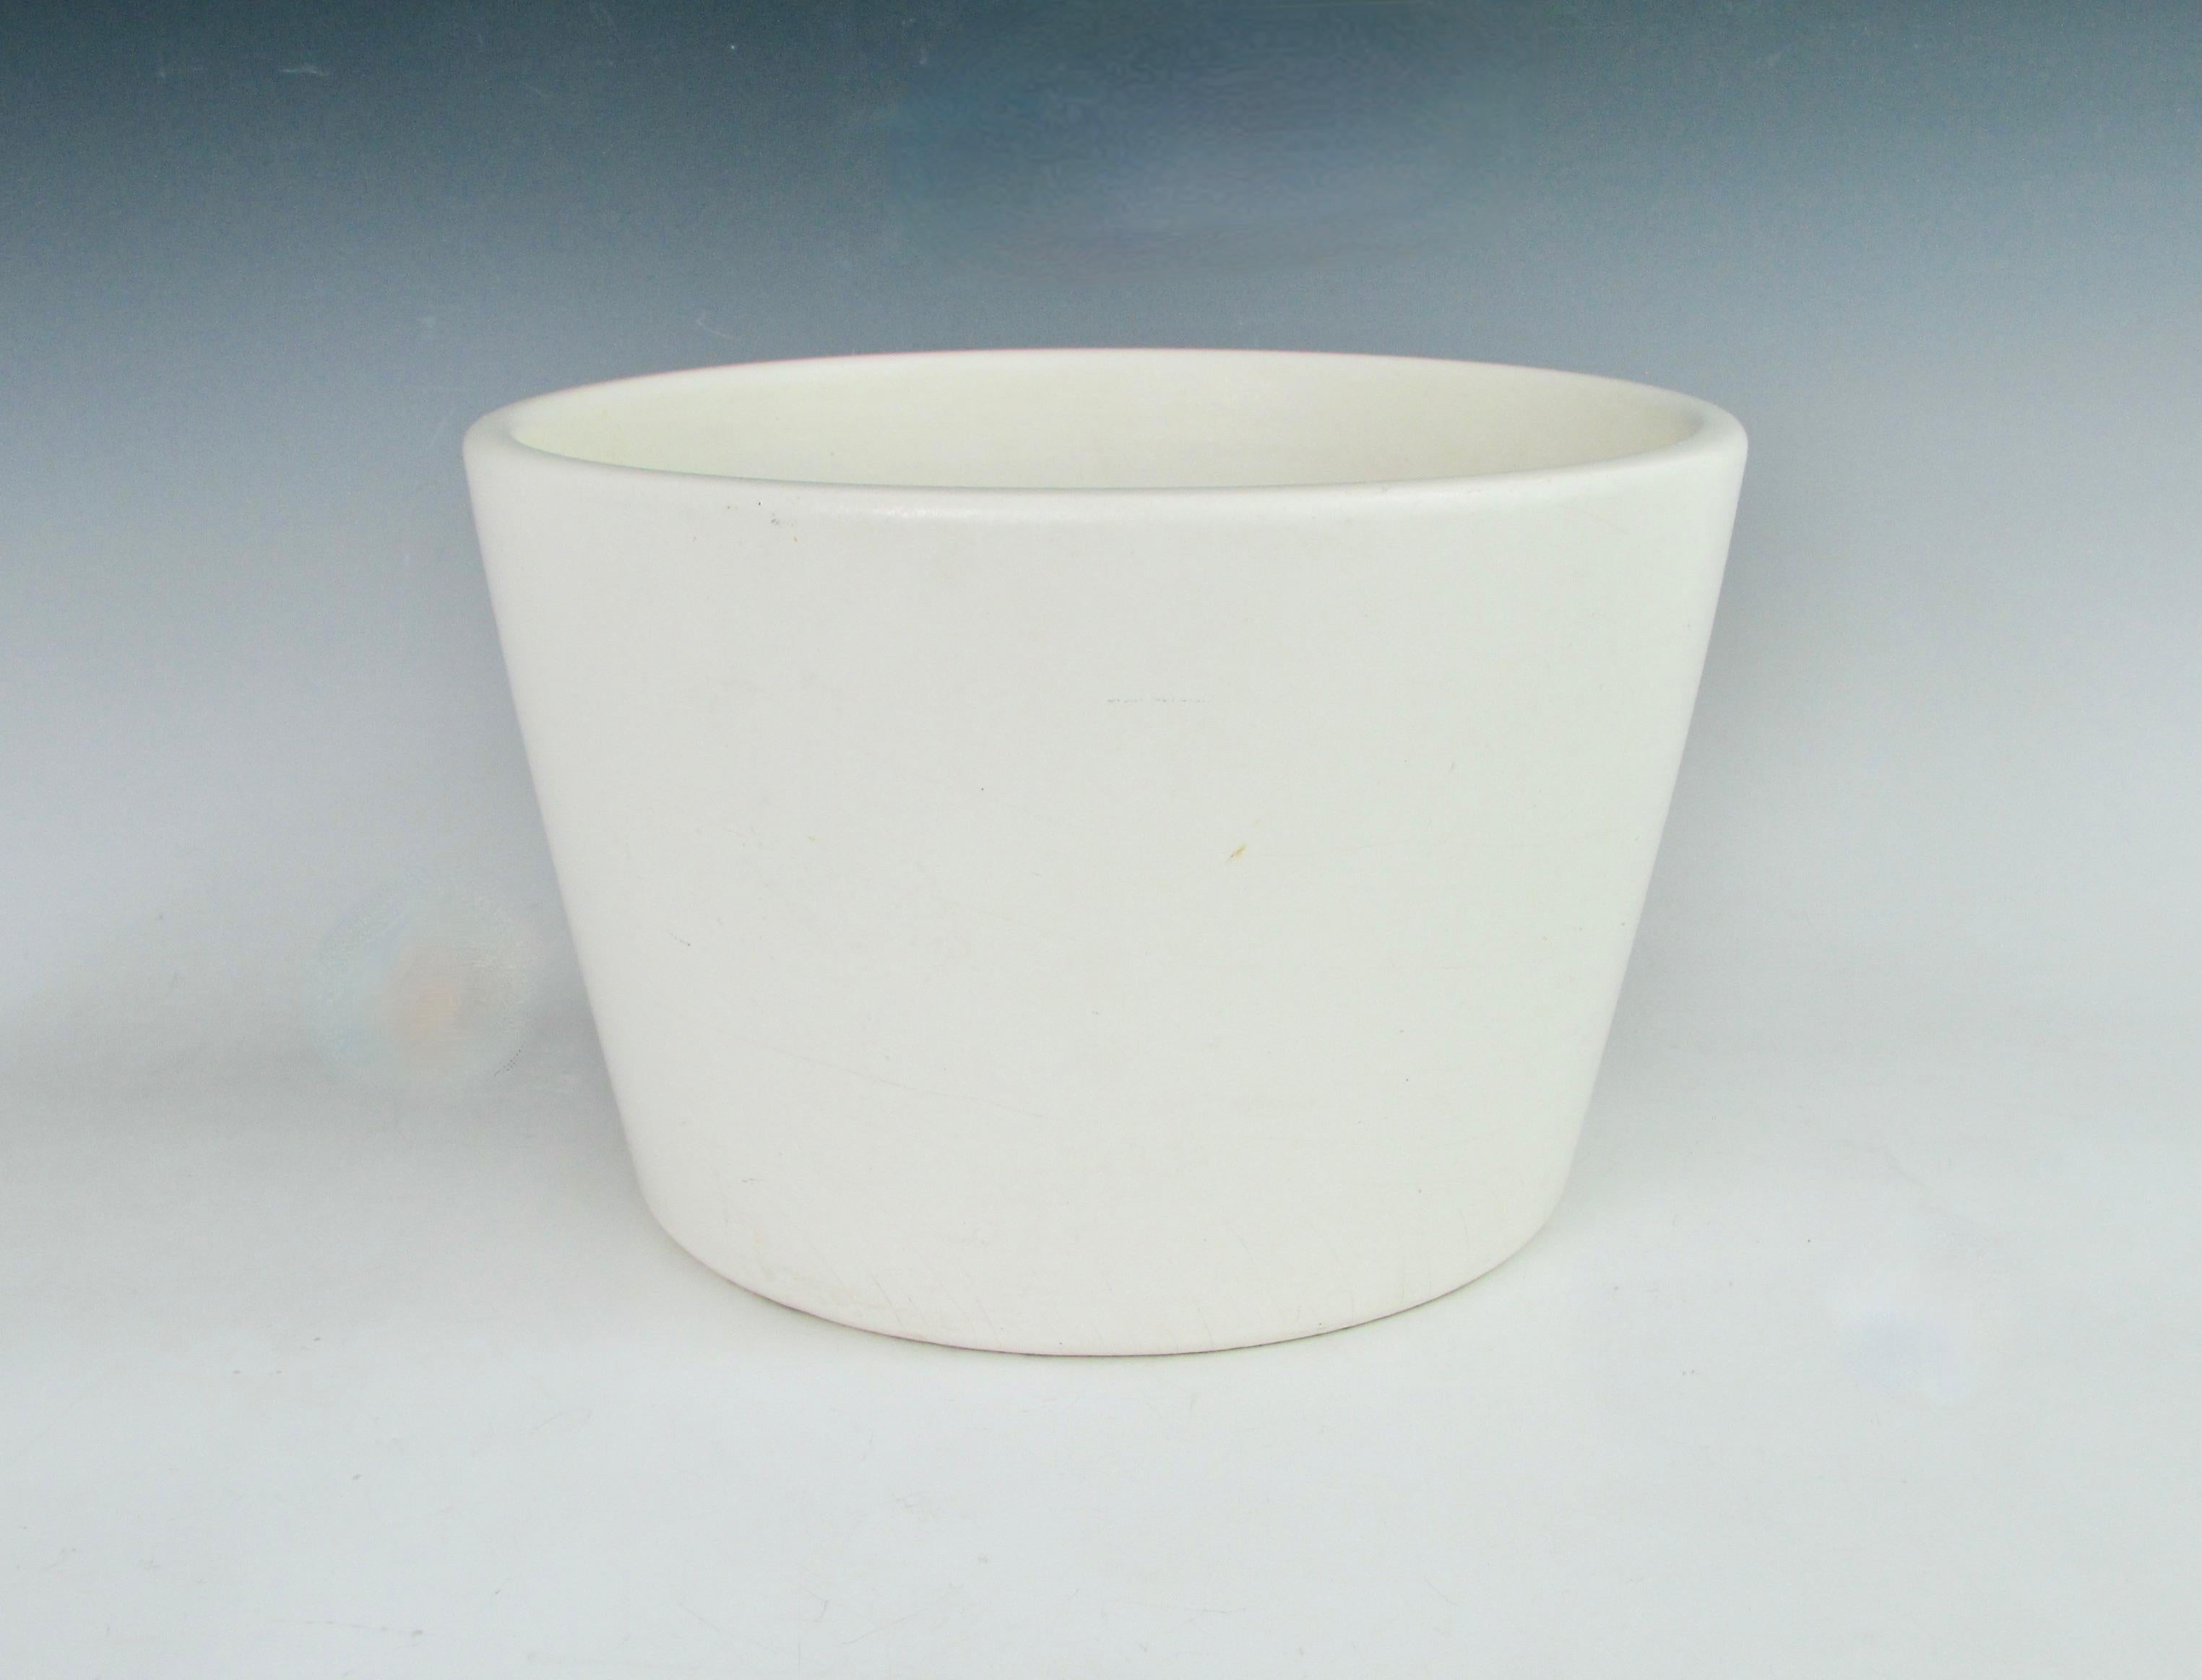 Marked only with USA on the underside. I am attributing this matte white planter pot to Architectural pottery. Possibly Gainey as well. Measures 7.75 tall diameter tapers from 12 at top down to 9.5 at base. Very clean outer glaze interior shows